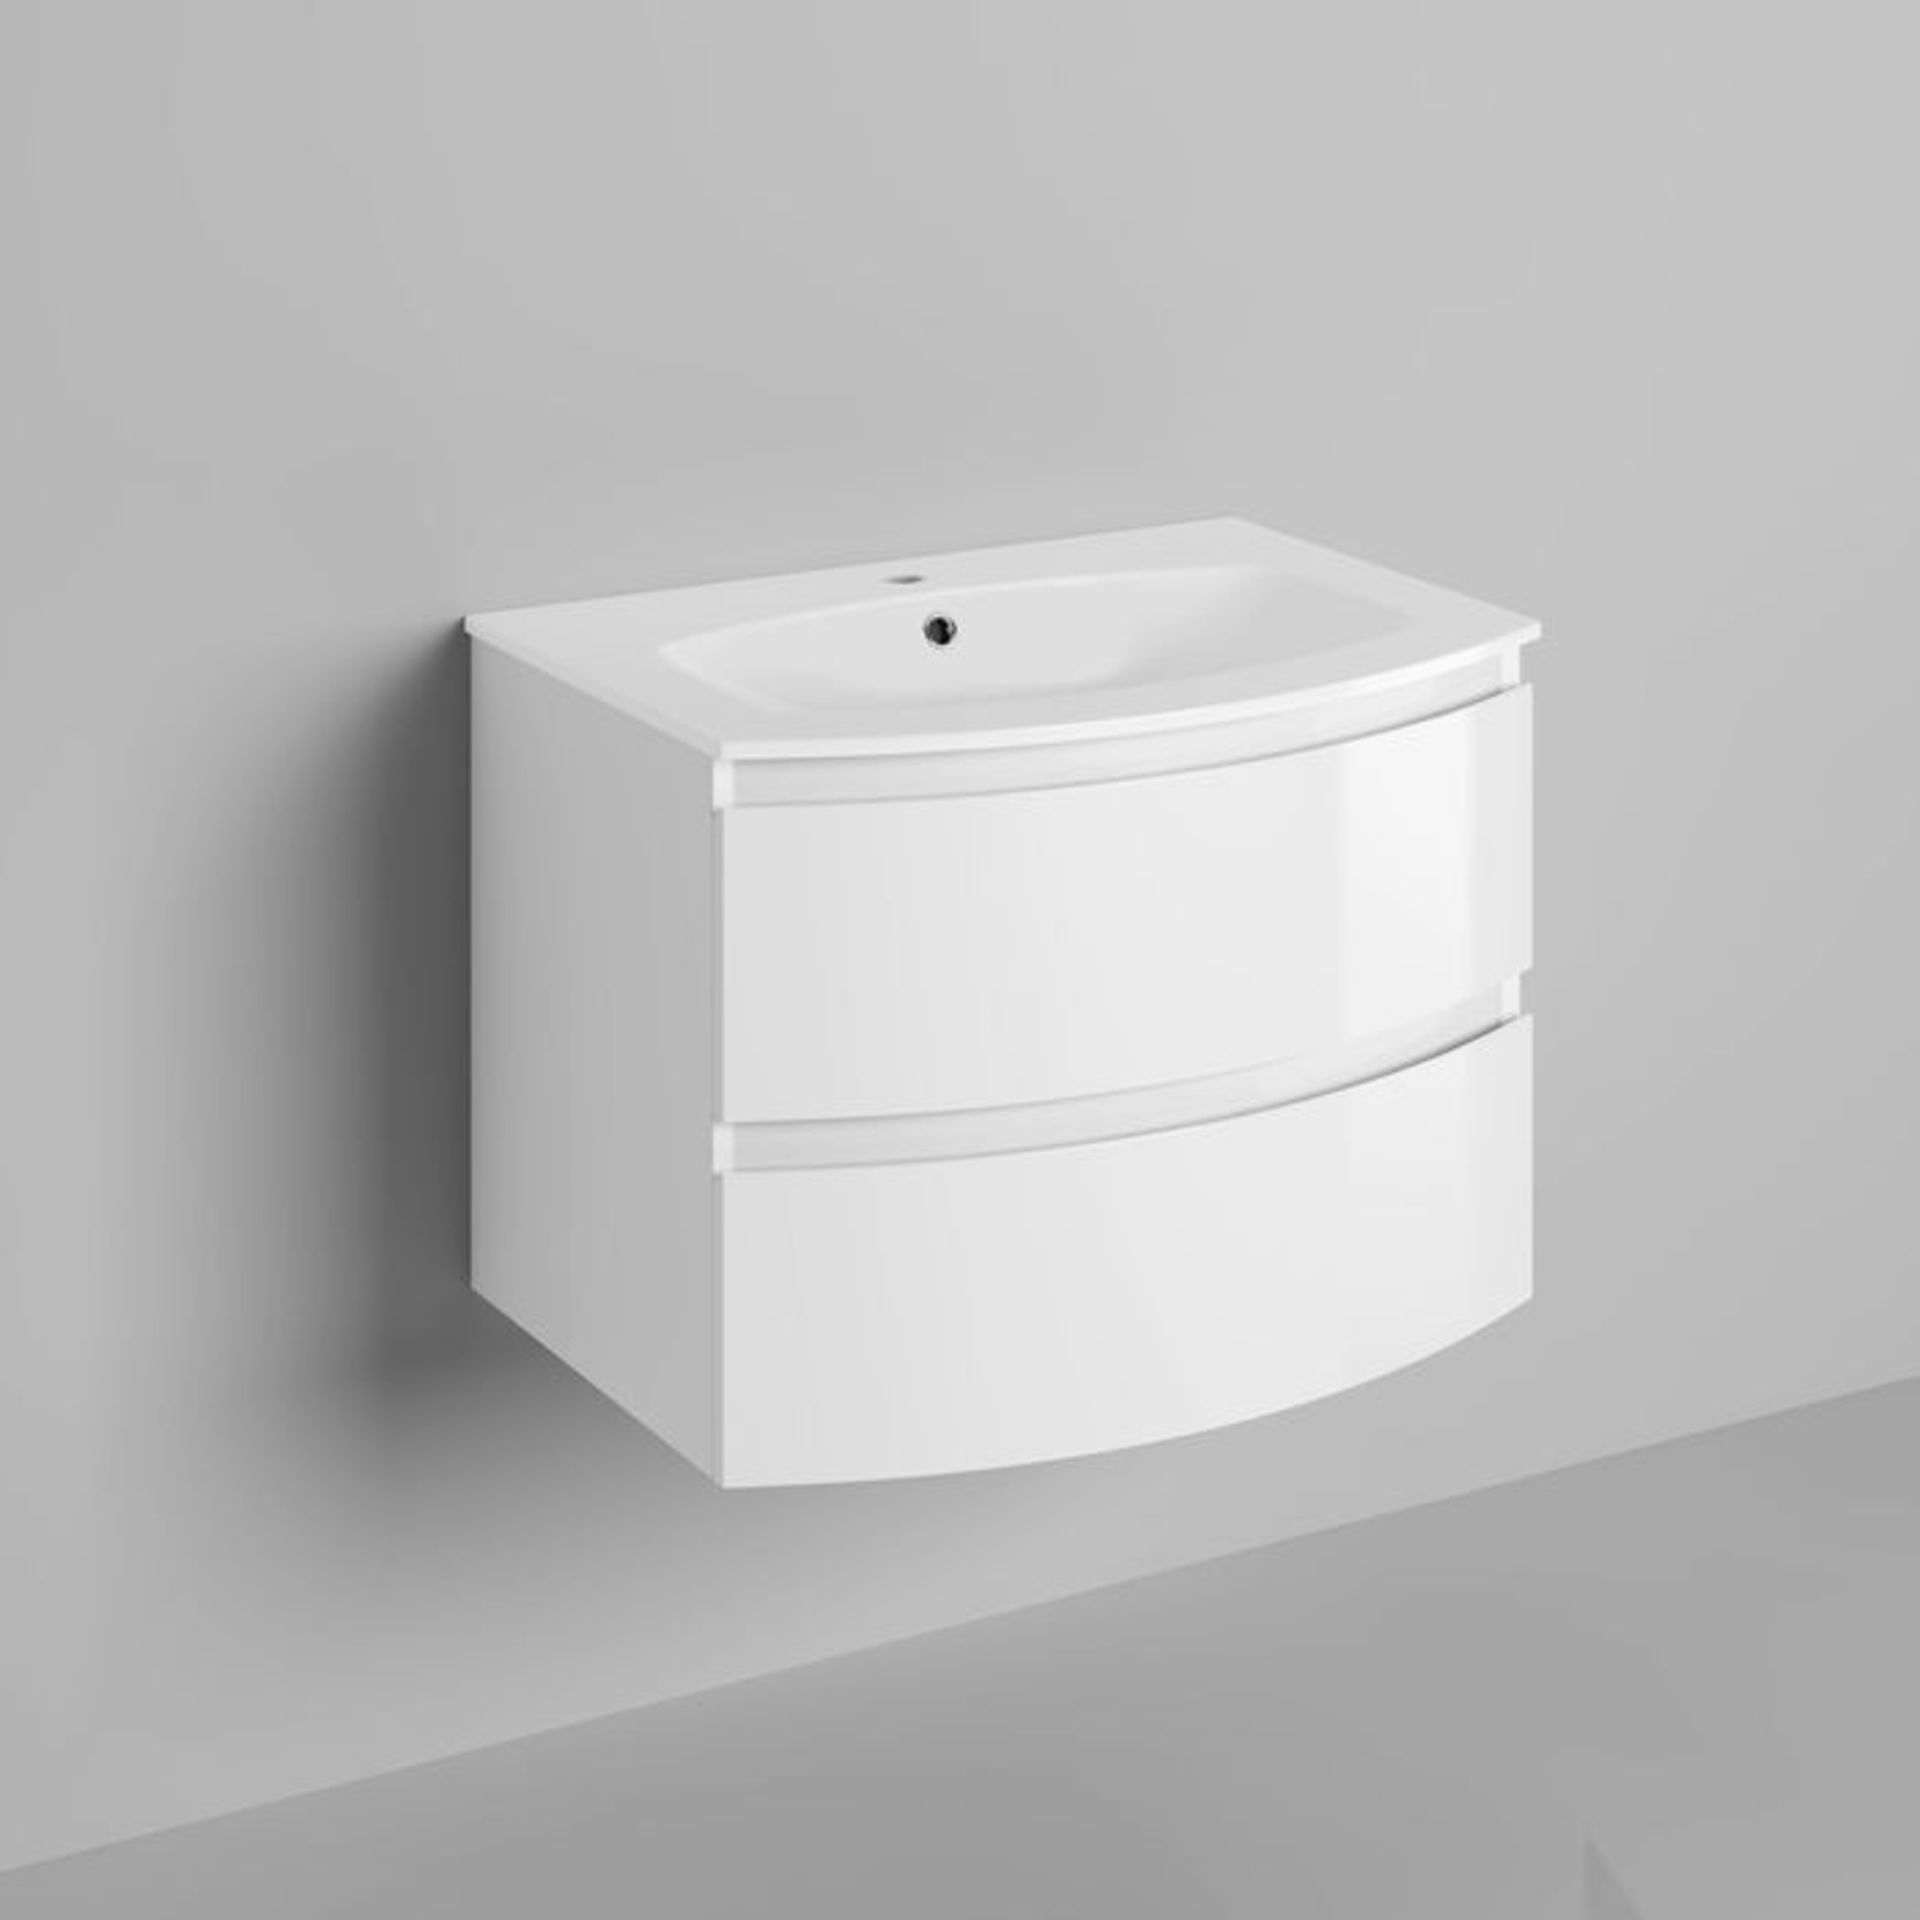 New 700mm Amelie High Gloss White Curved Vanity Unit - Wall Hung. Rrp £749.99.Comes Complete ... - Image 2 of 3